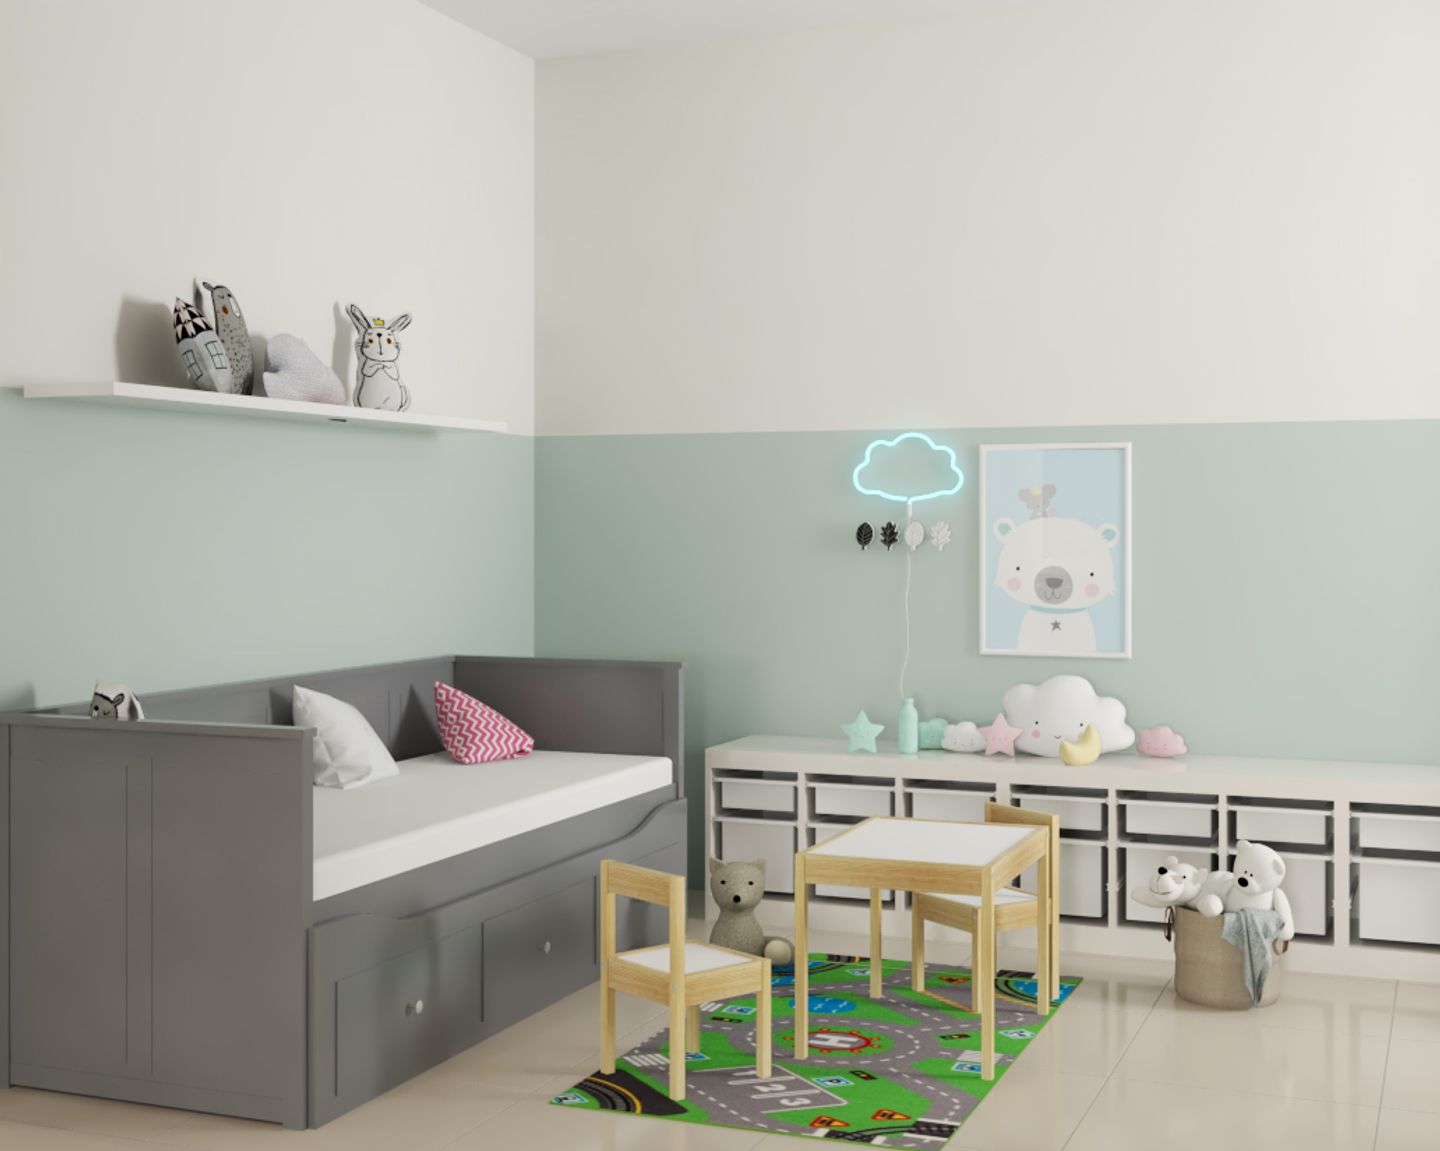 Kid's Room Design With 3-in-1 bed - Livspace